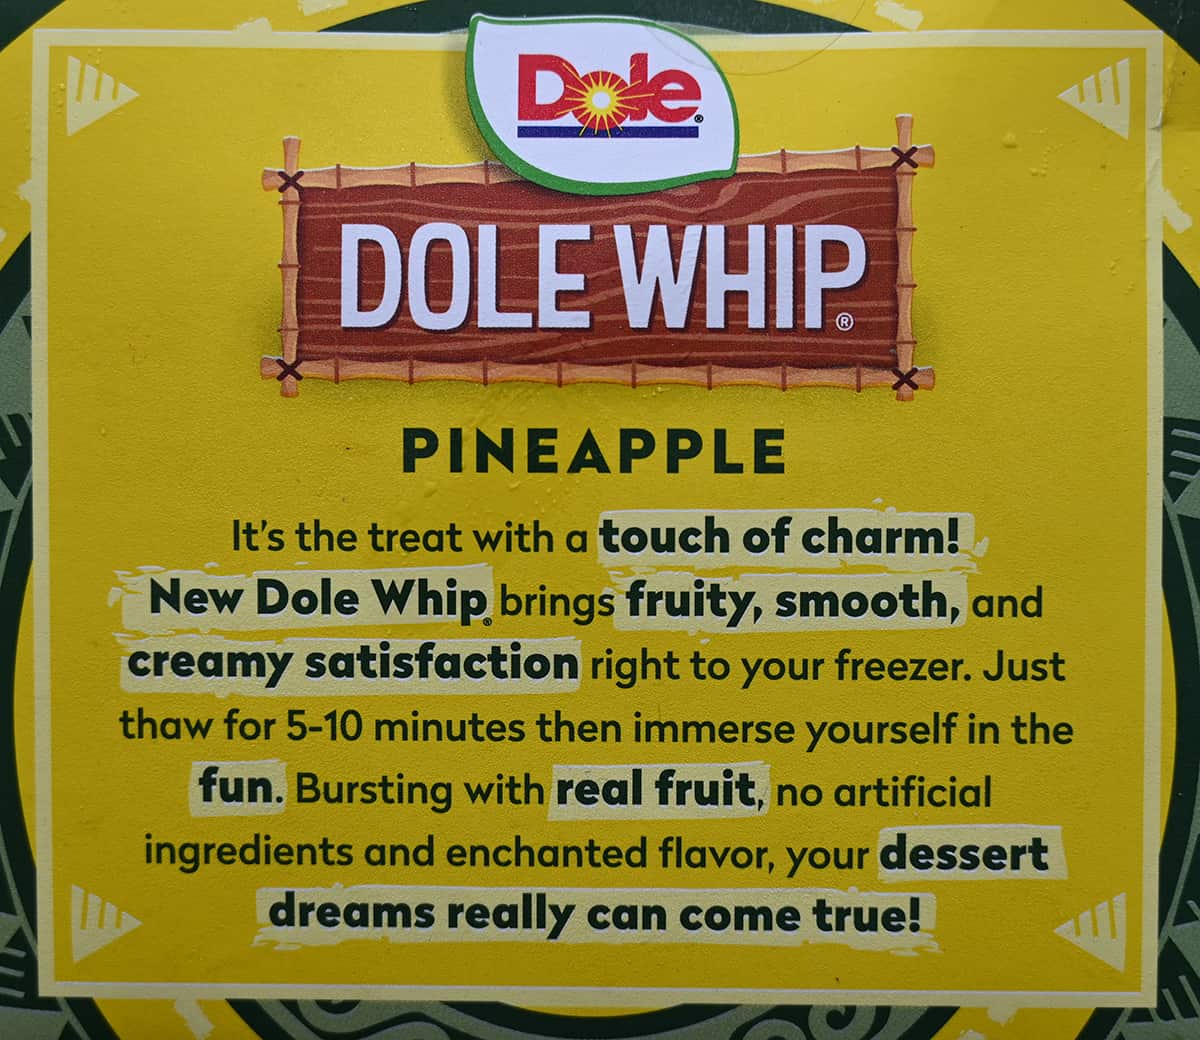 Side view image of the box of Dole Whip showing the product description from the box.